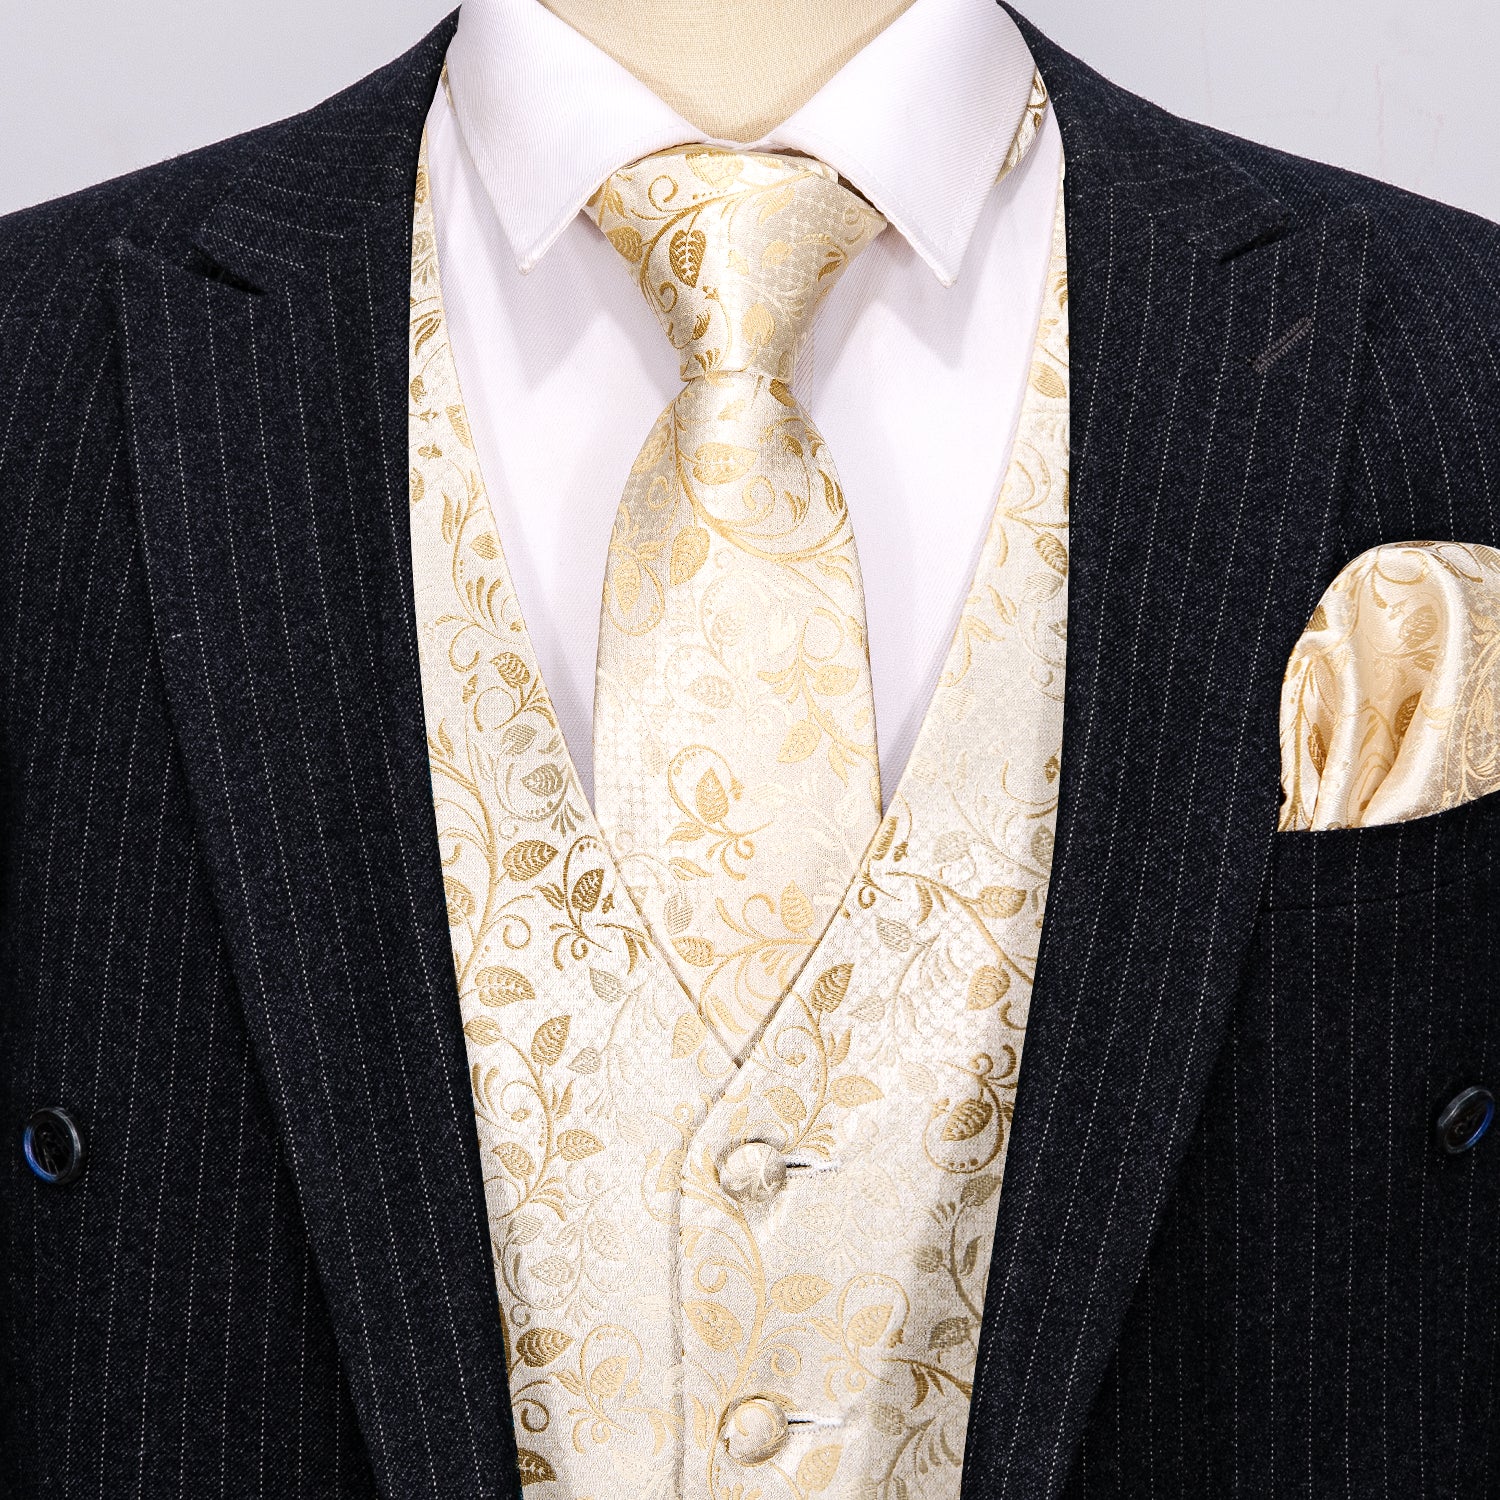 gold vest and bow tie